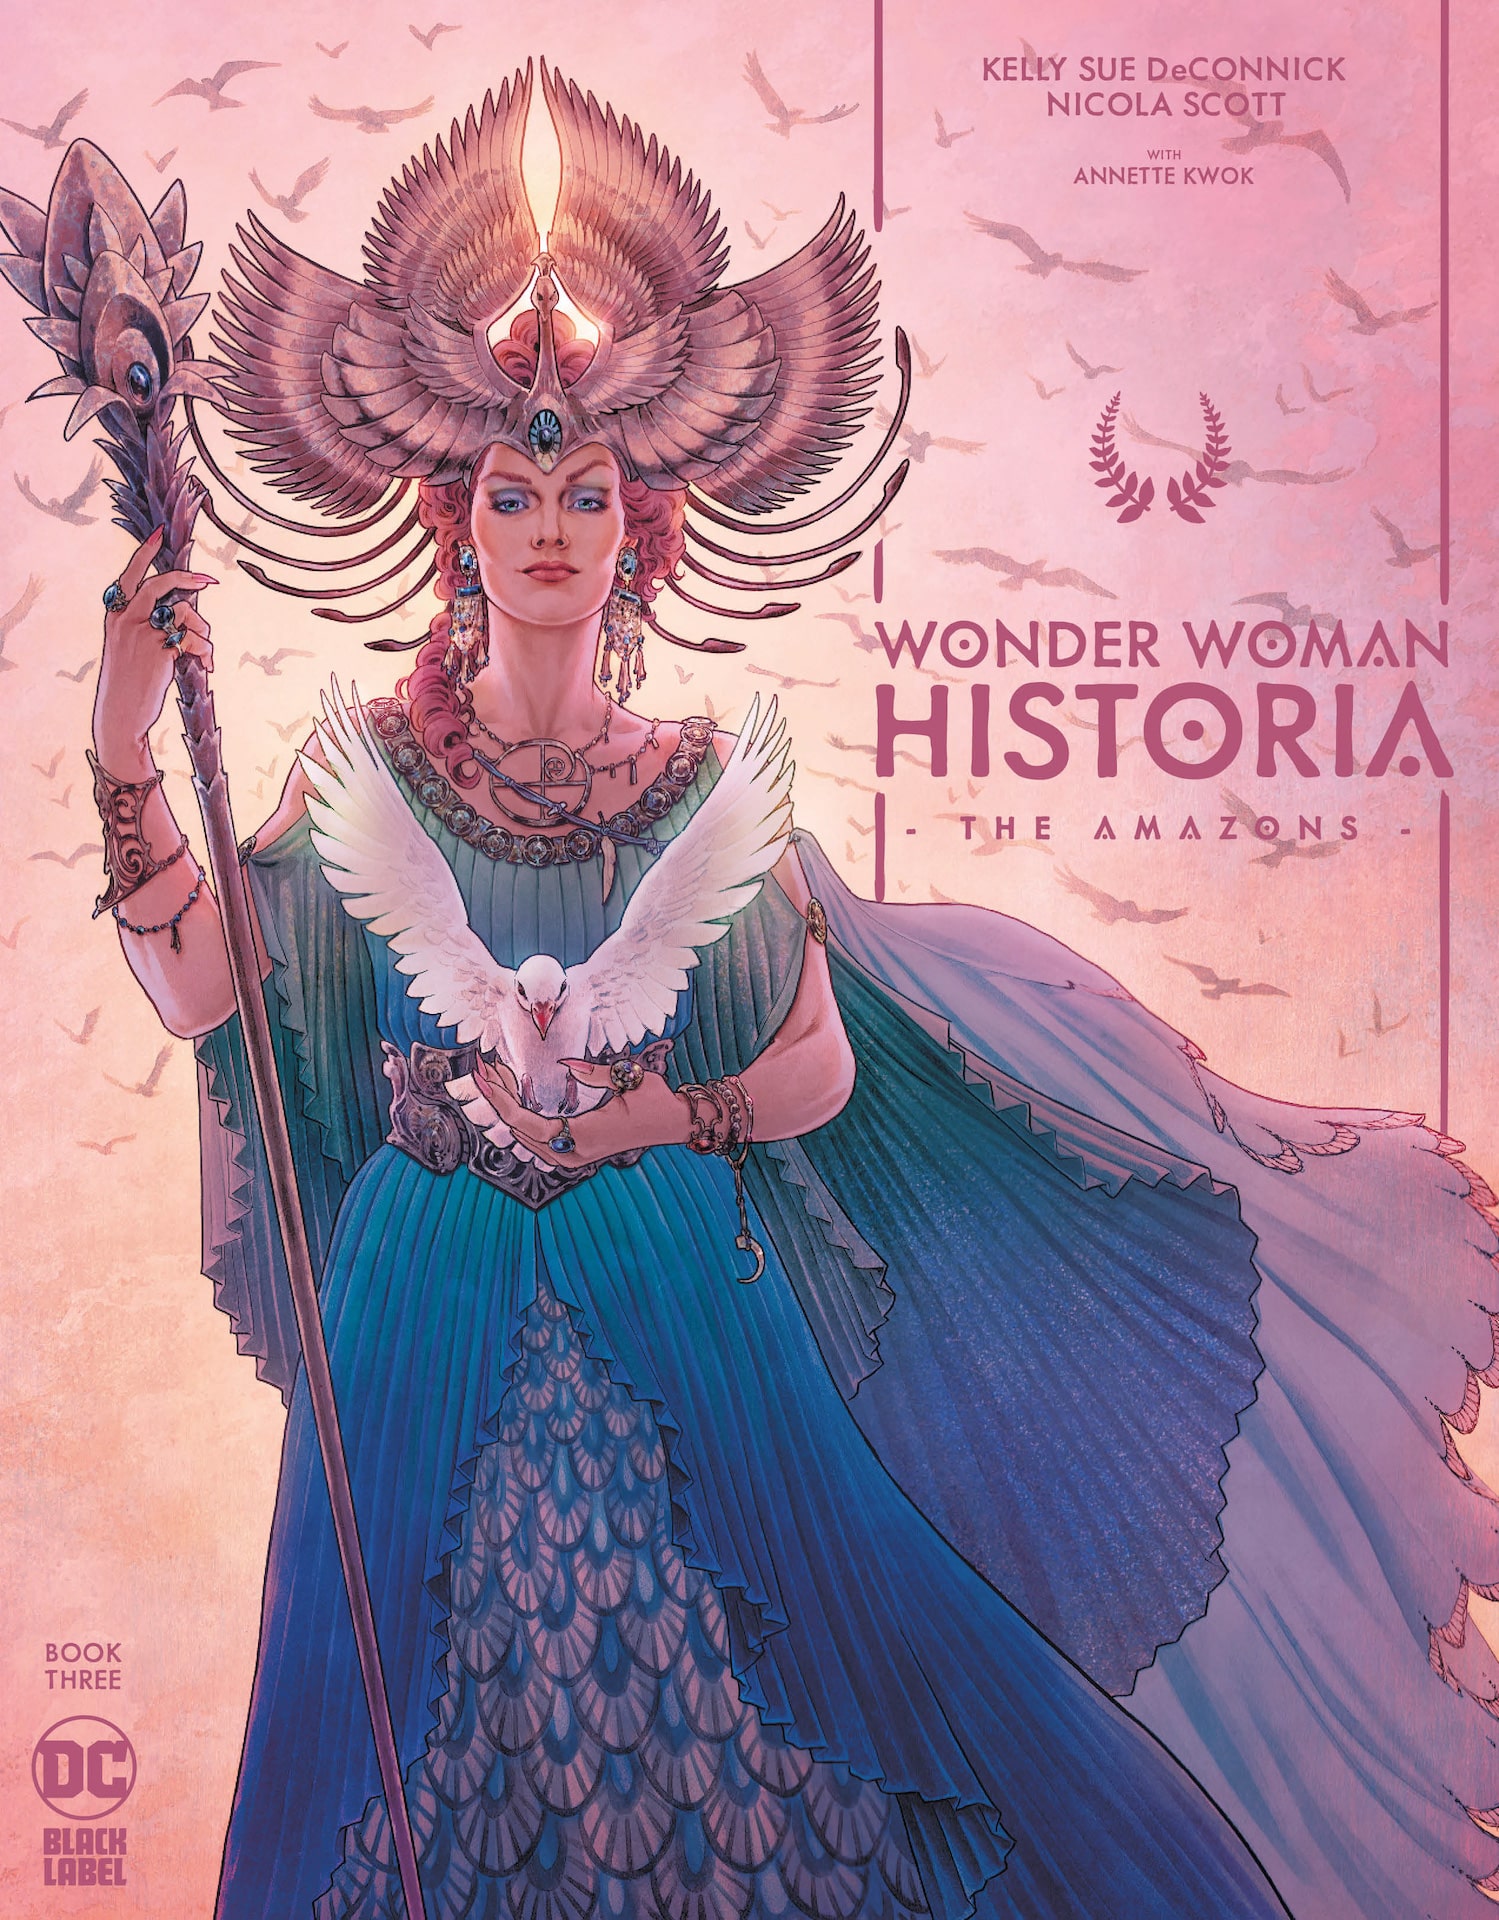 DC Preview: Wonder Woman Historia: The Amazons #3